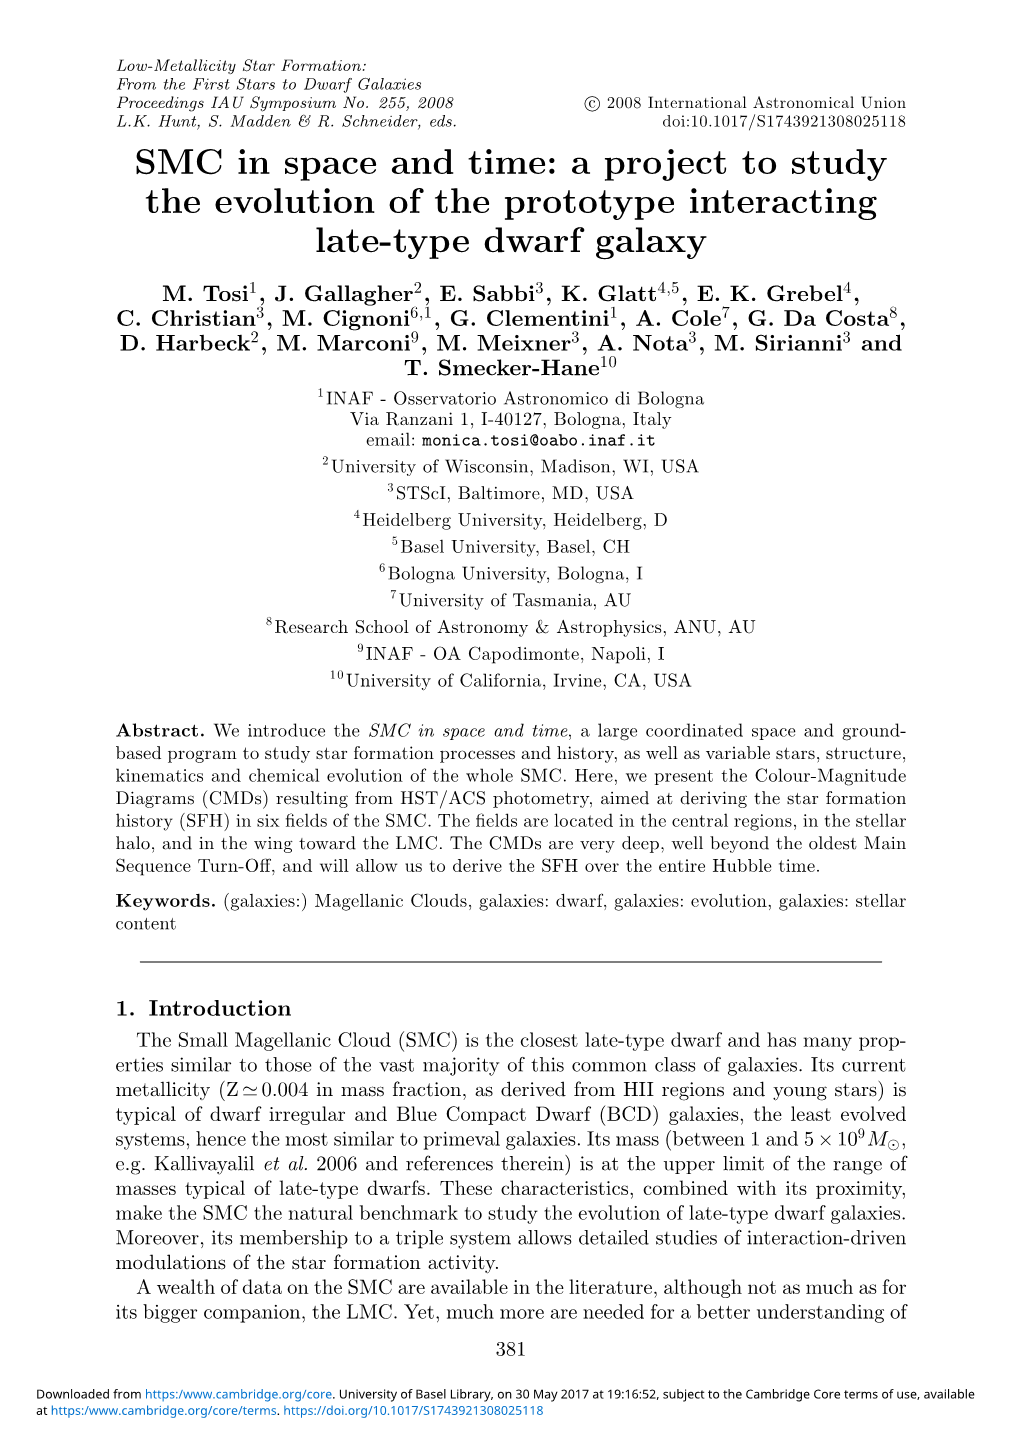 A Project to Study the Evolution of the Prototype Interacting Late-Type Dwarf Galaxy